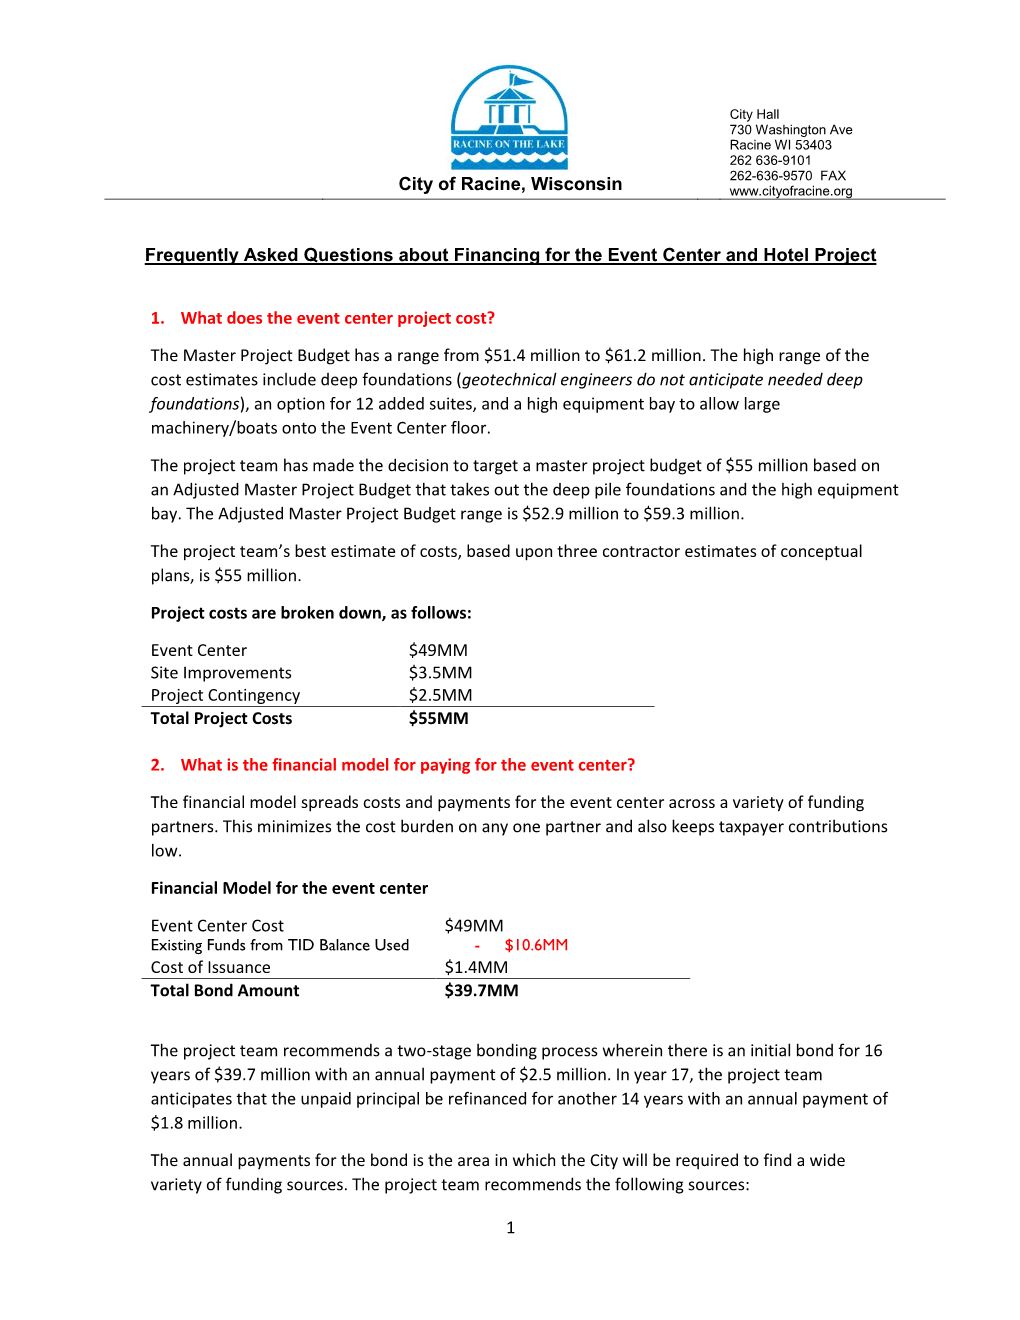 City of Racine, Wisconsin 1 Frequently Asked Questions About Financing